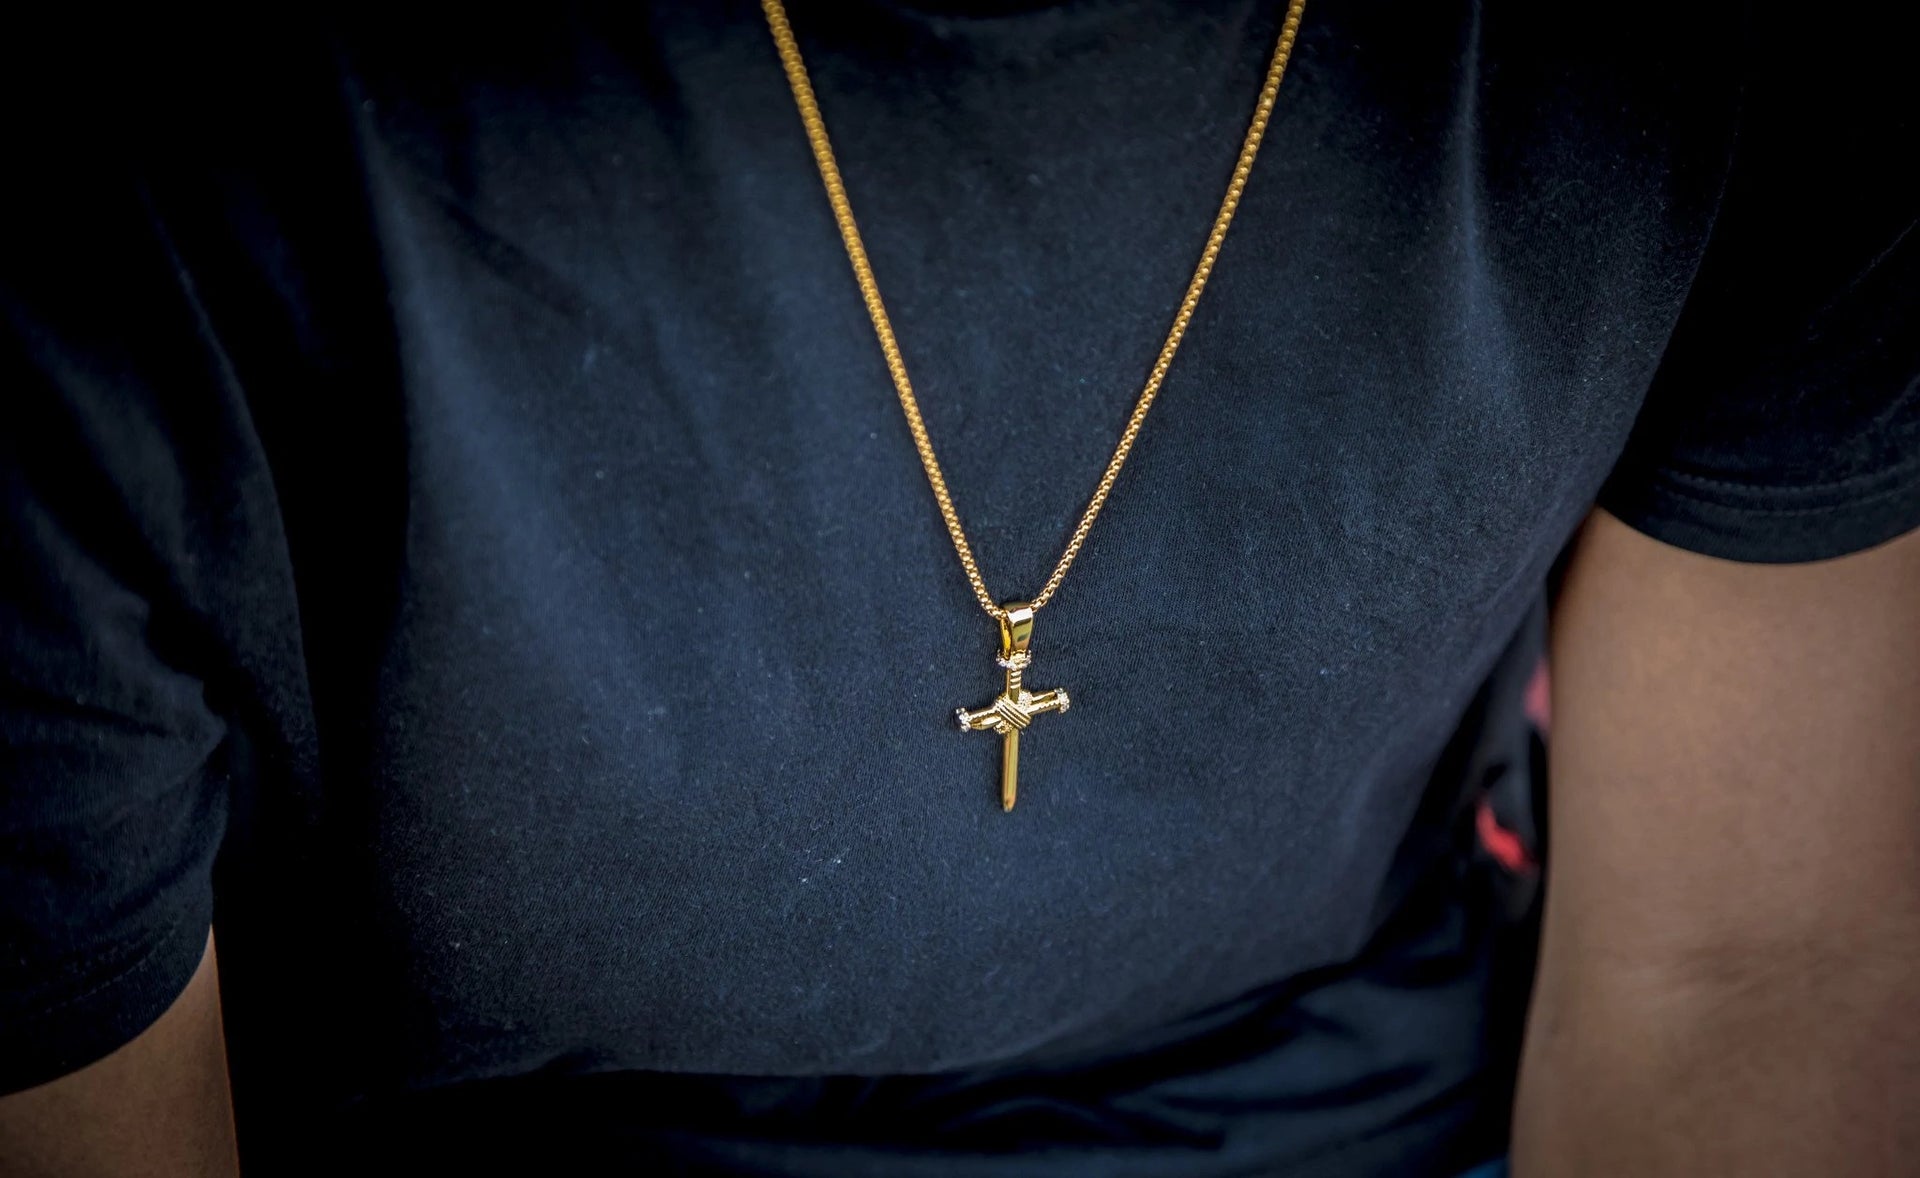 The 18K Gold Plated Nail Cross Pendant | Golden Gilt being worn